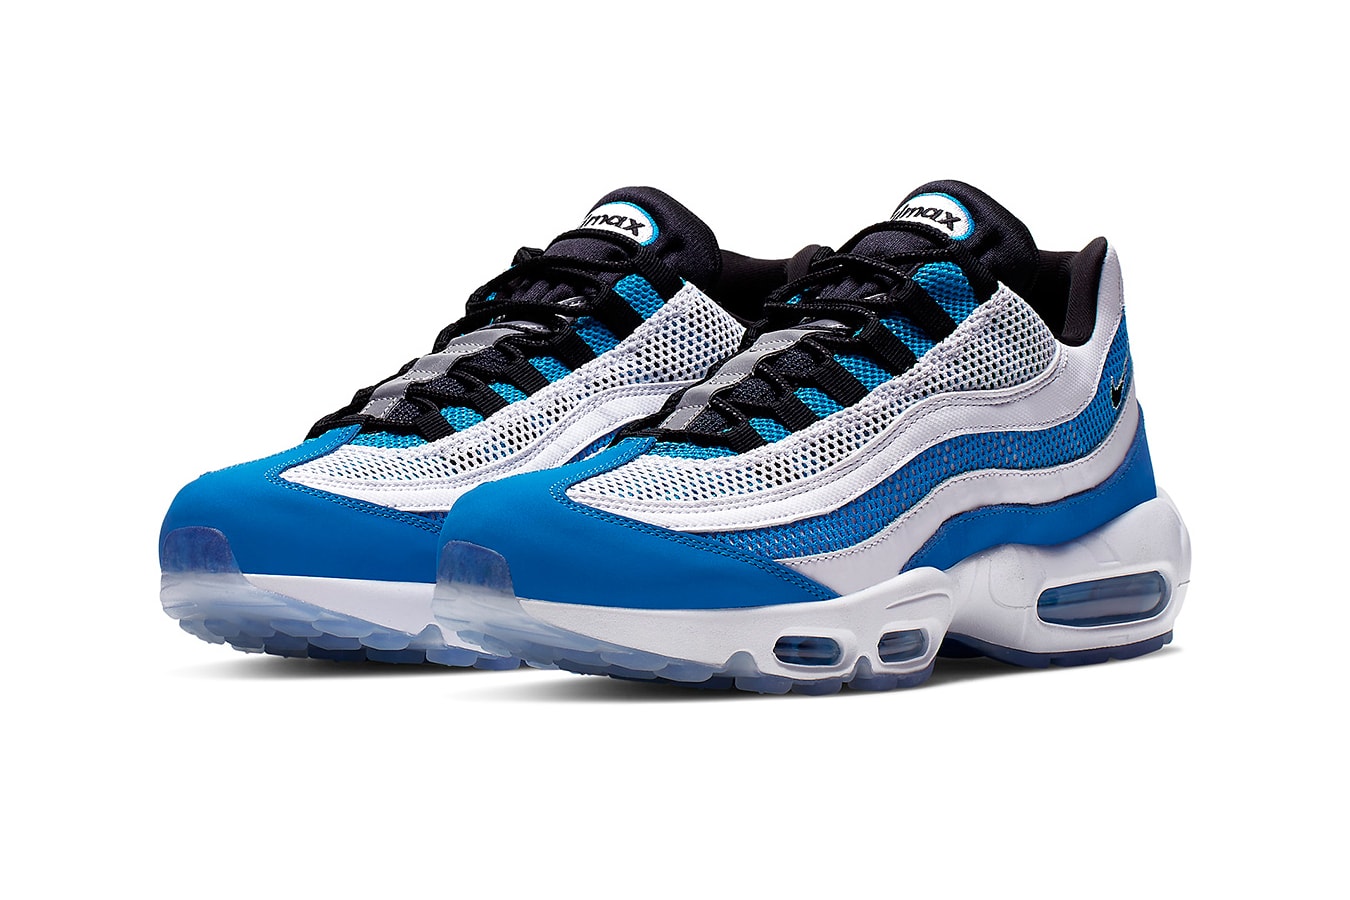 Royal Blue Nike Air Max 95 by Sergio Lozano sneakers shoes sporty 